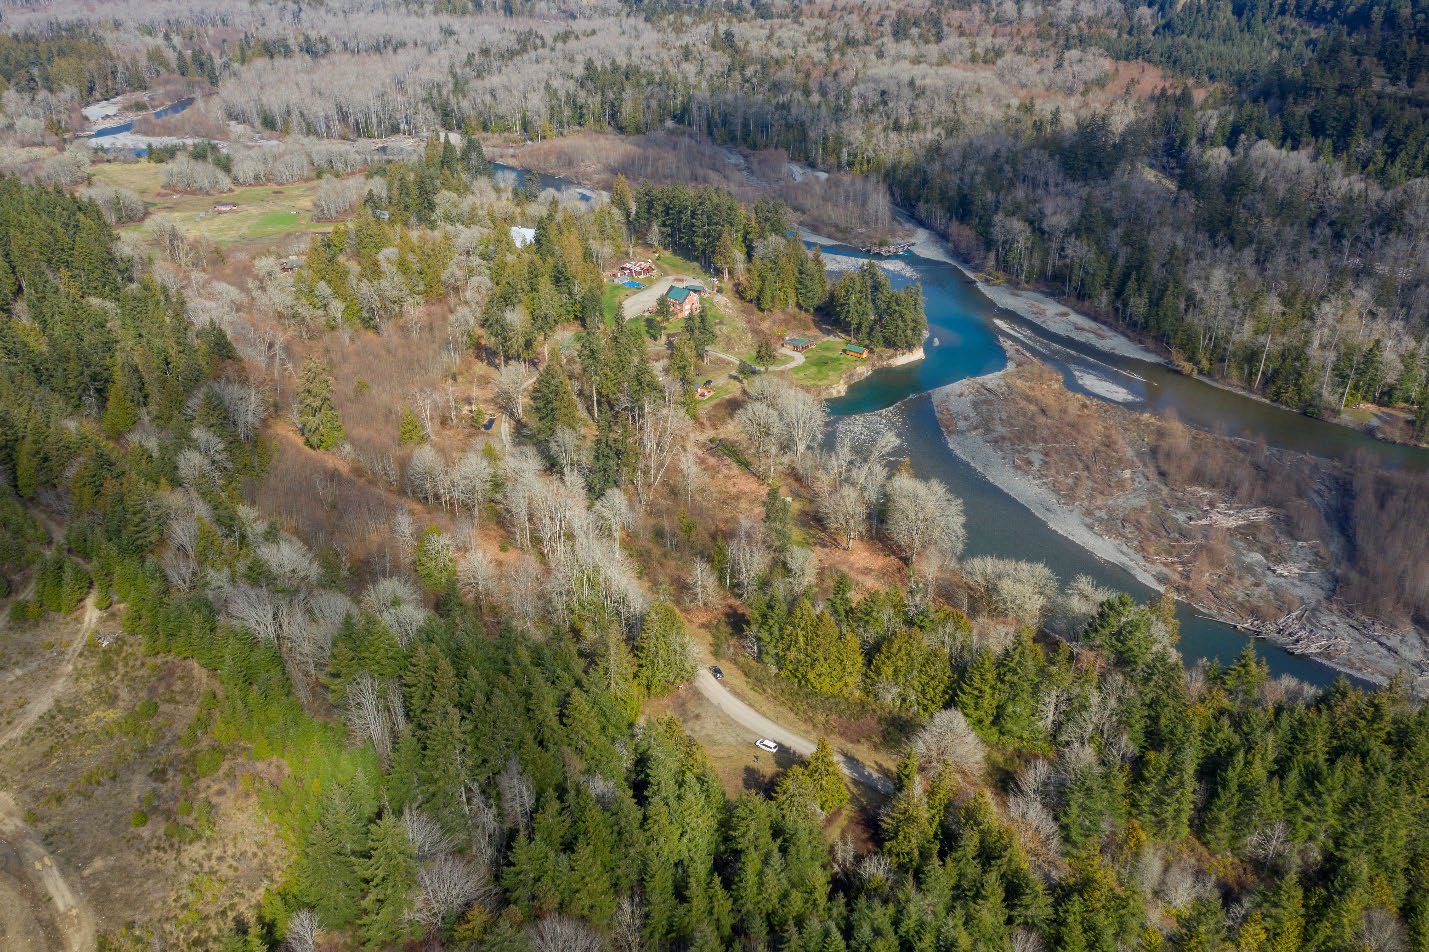 Aerial view of a braided river channel and the surrounding forested landscape.